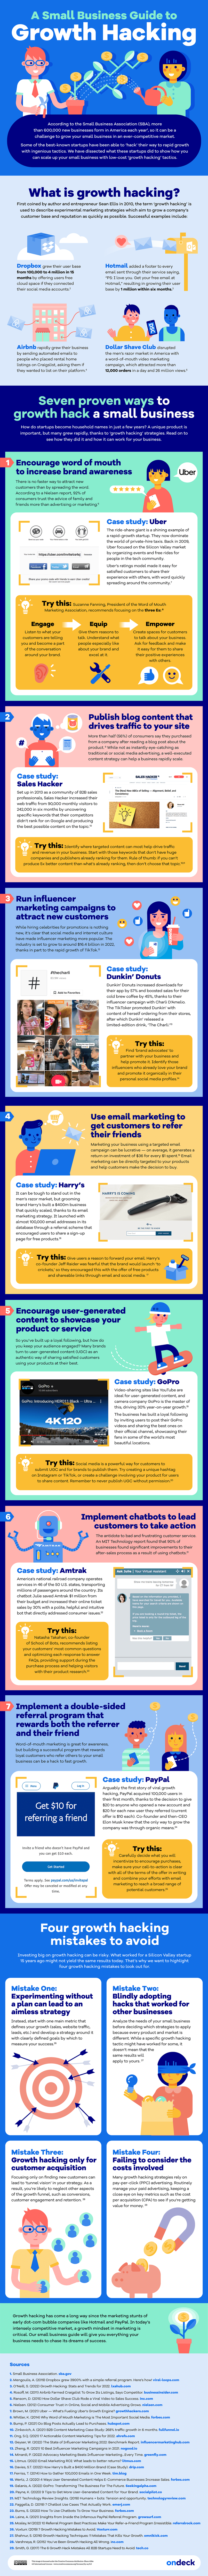 Infographic tips for small business growth